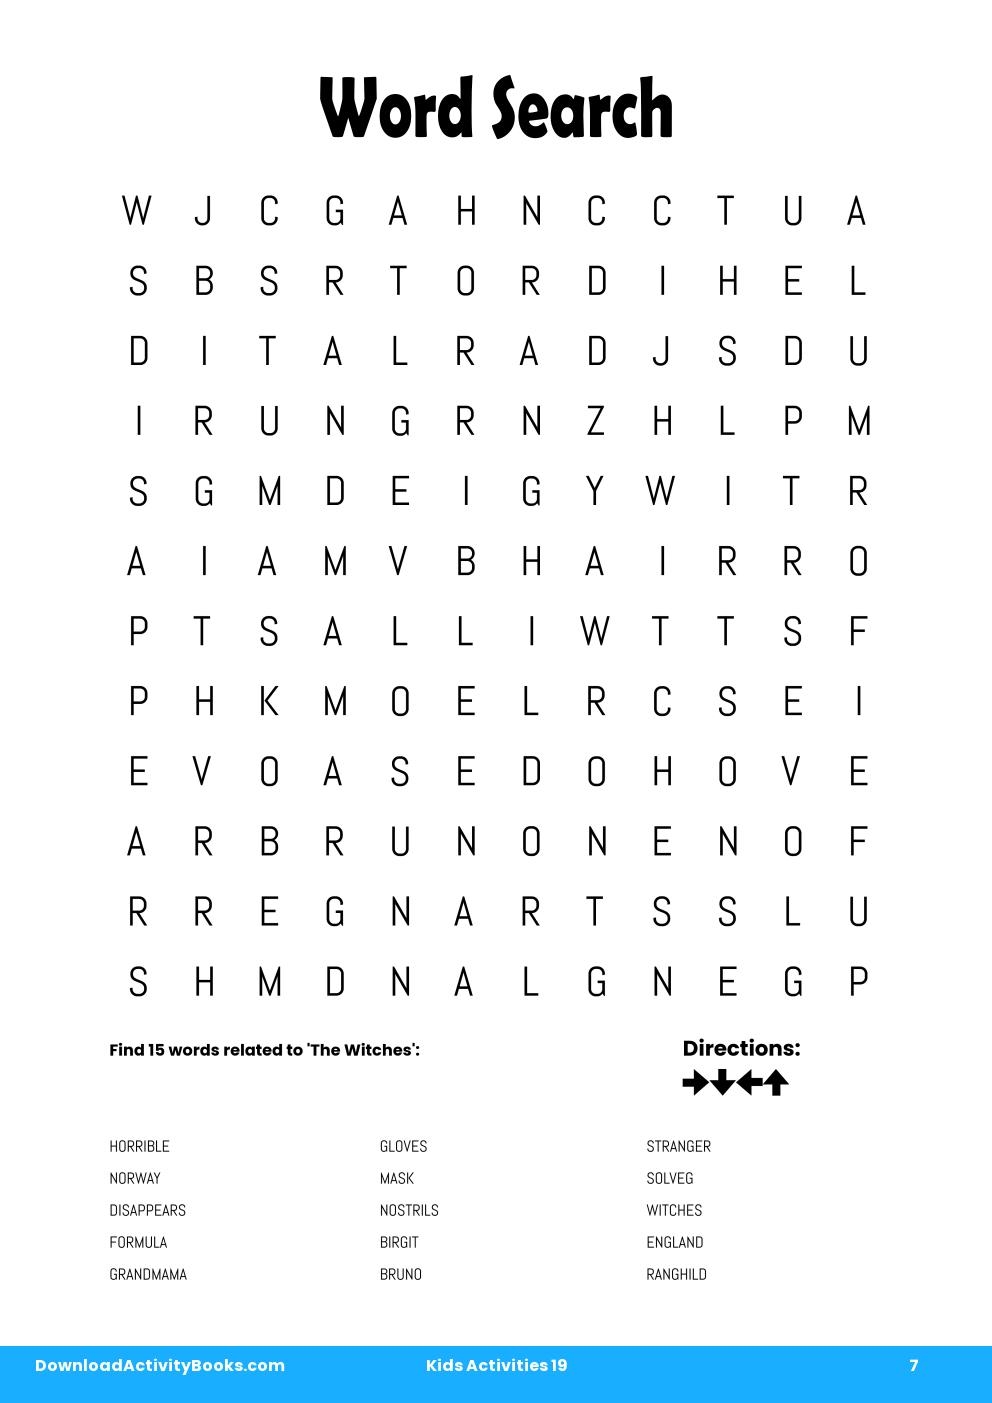 Word Search in Kids Activities 19